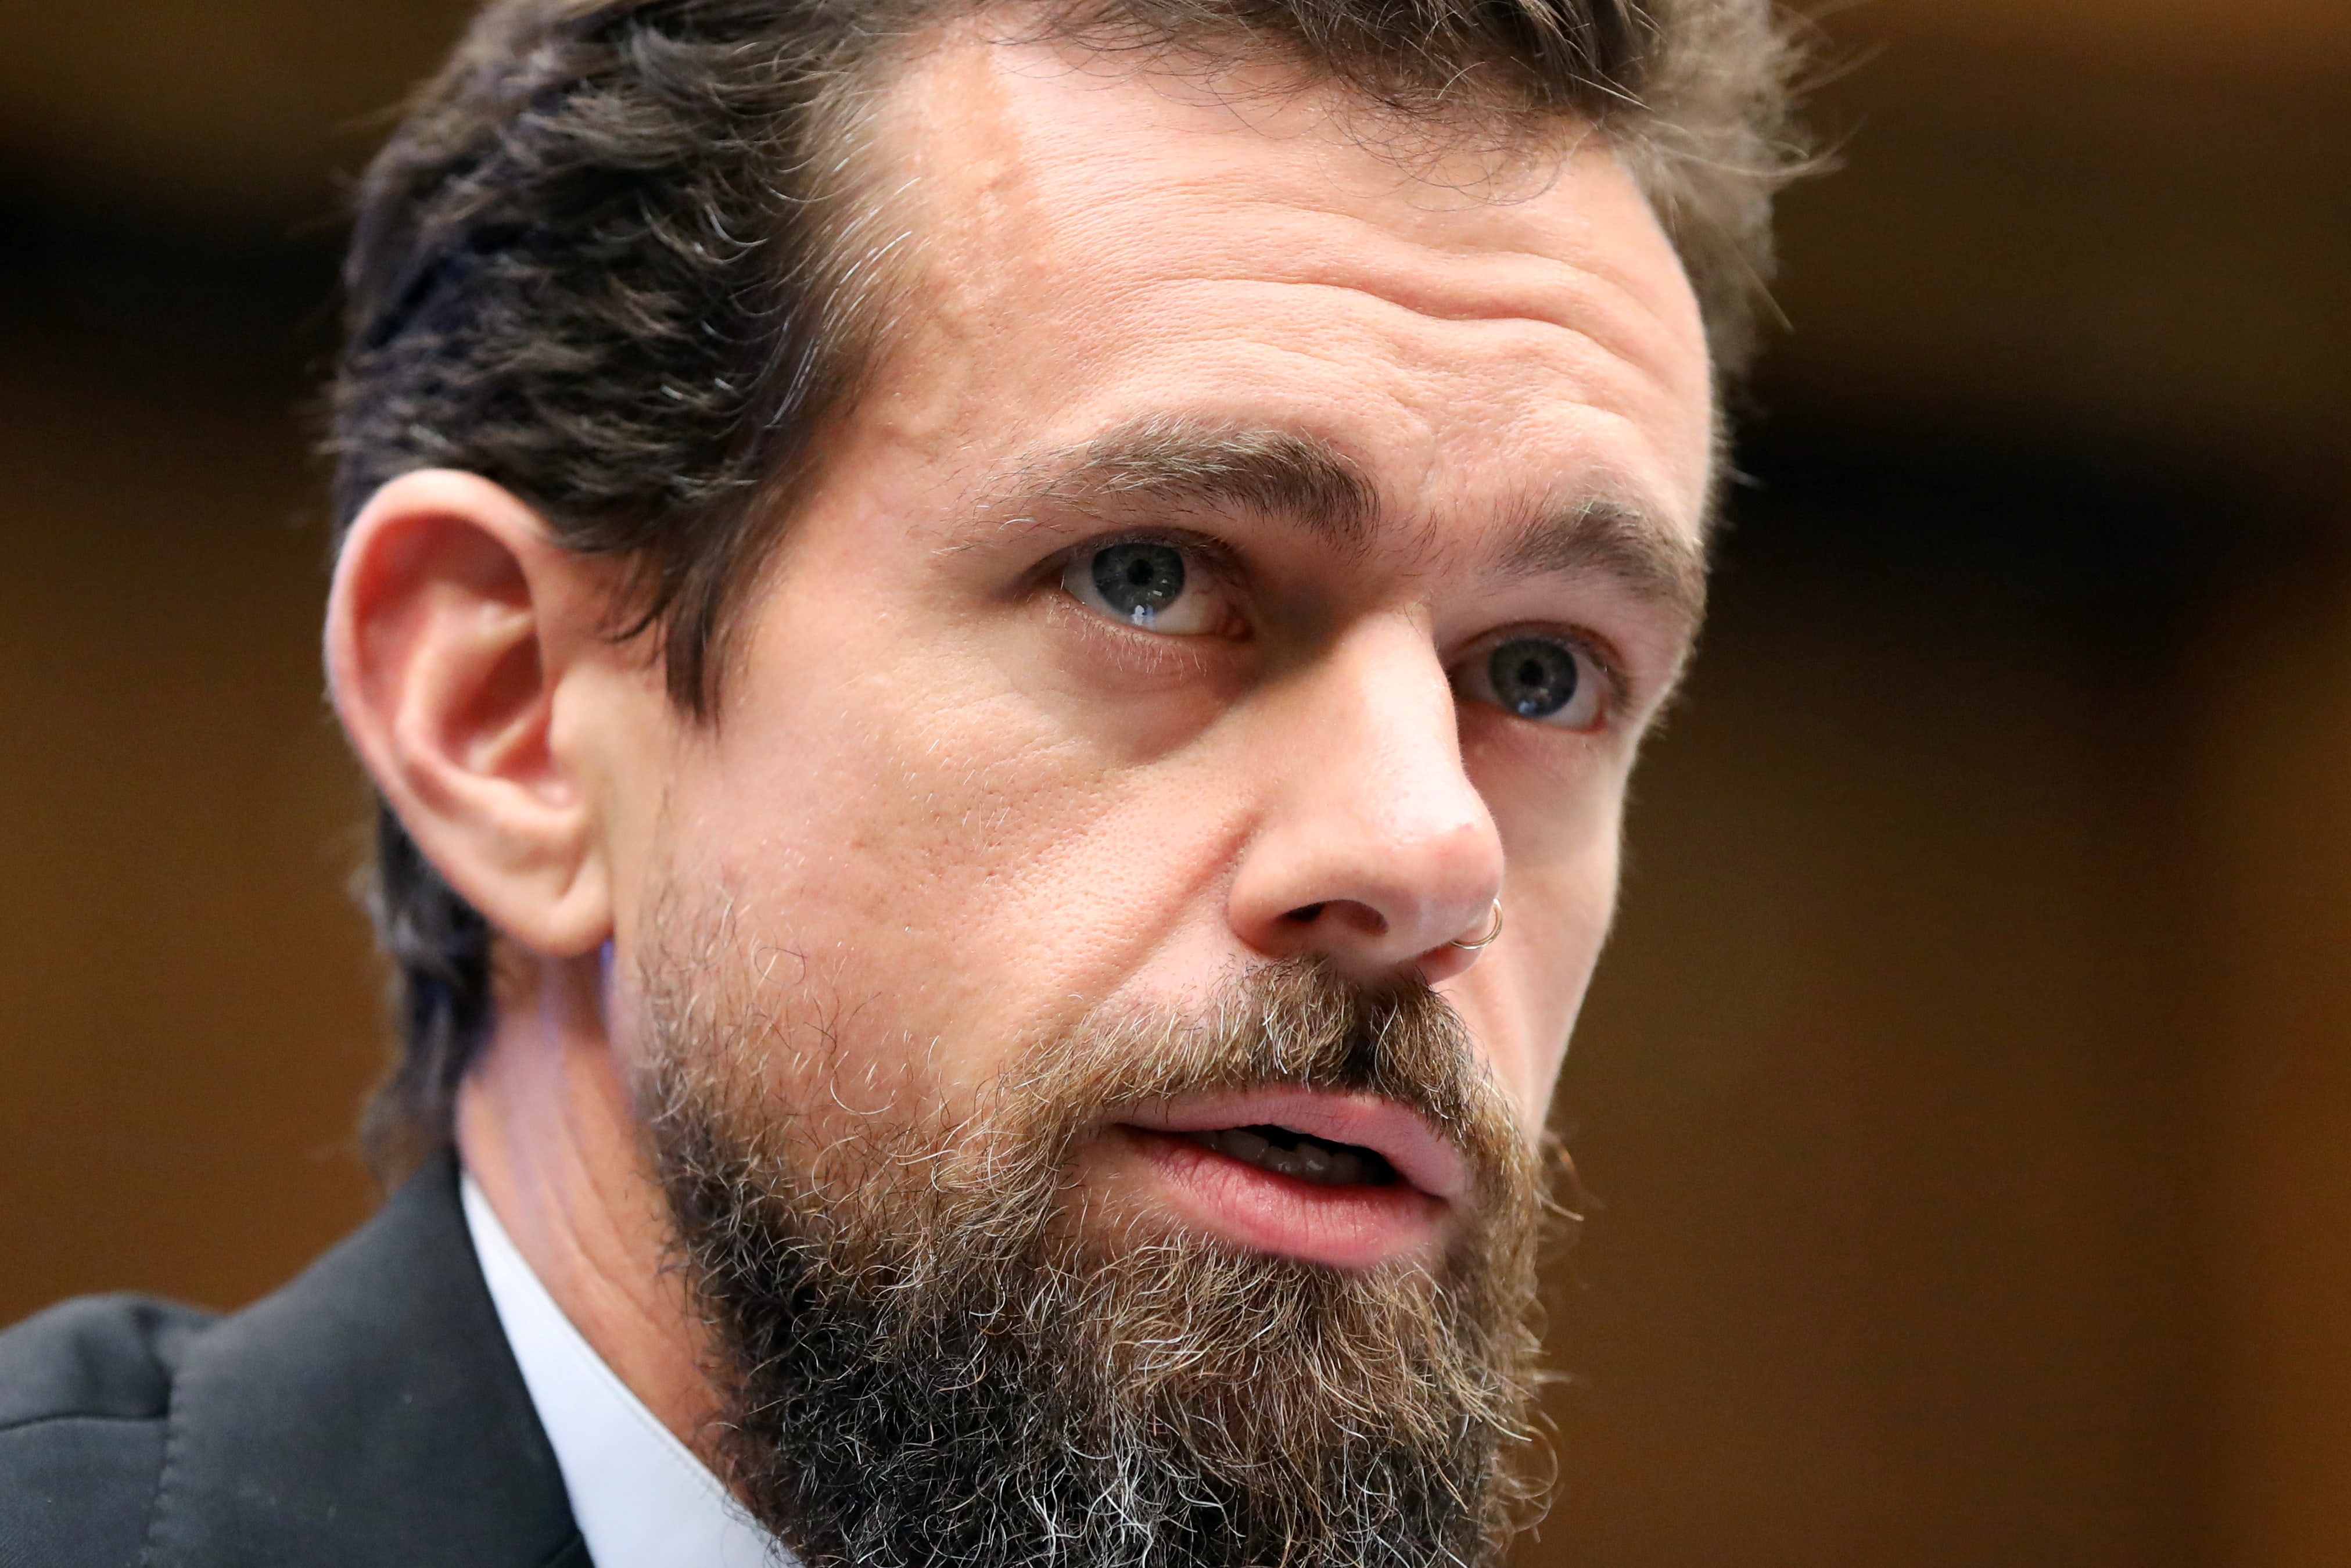 Twitter's Jack Dorsey is gone but social media giant's new CEO is worse